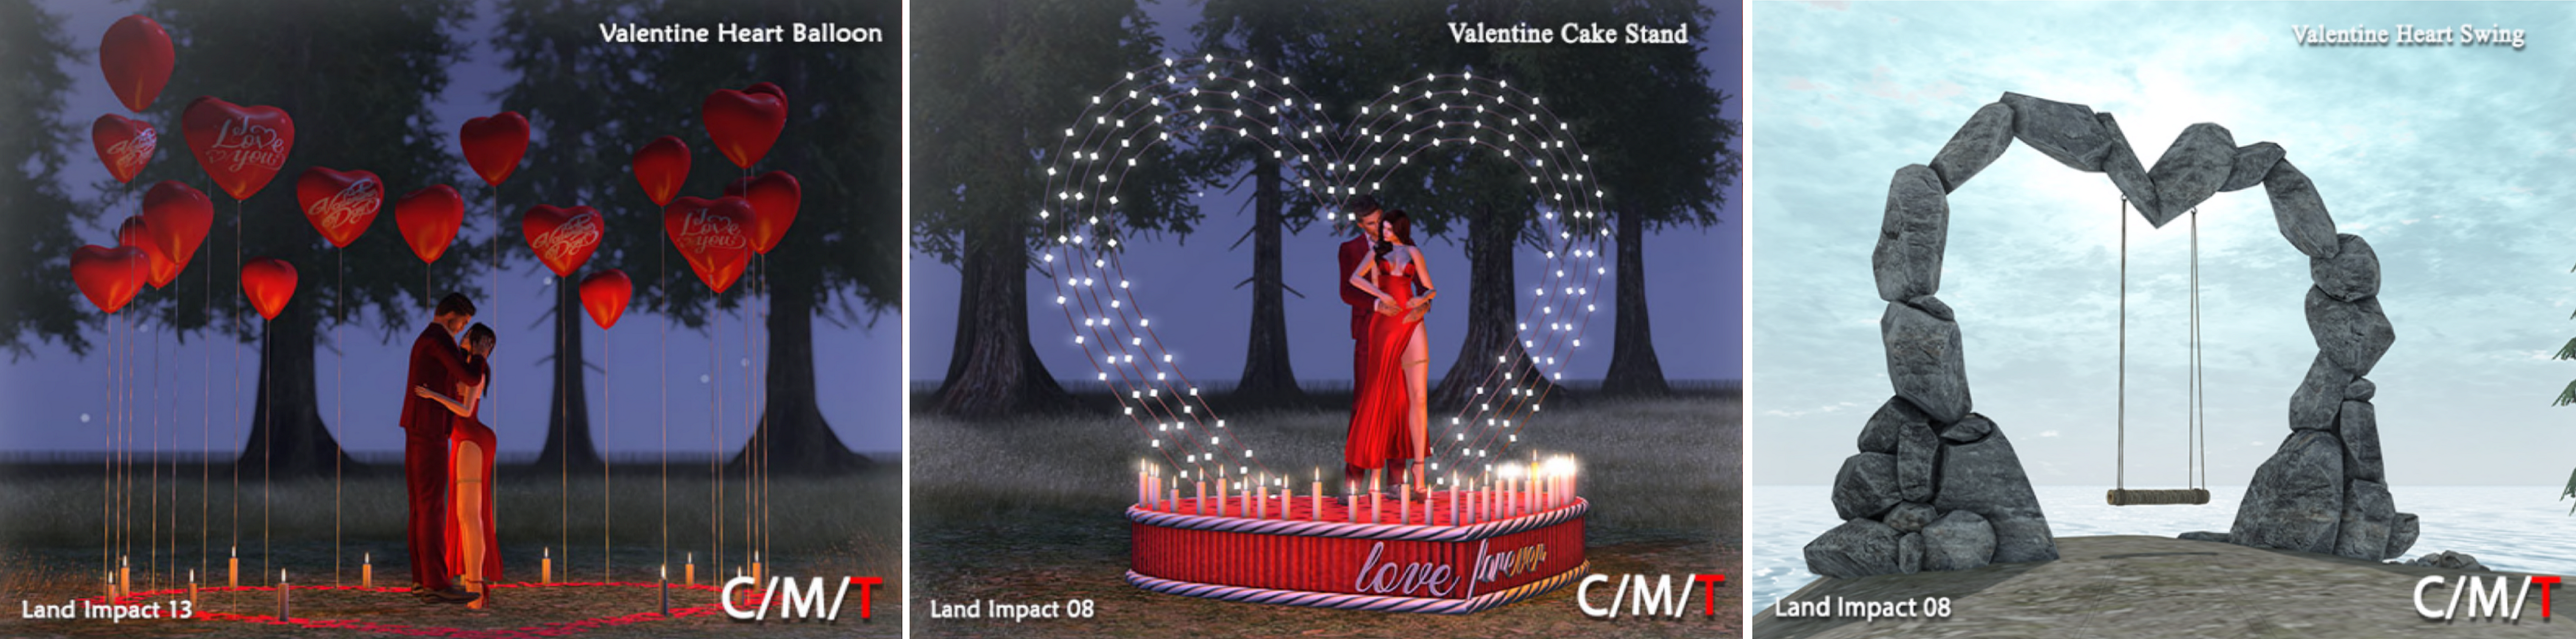 Killers Productions – Valentine Heart Balloon, Cake Stand & Heart Swing